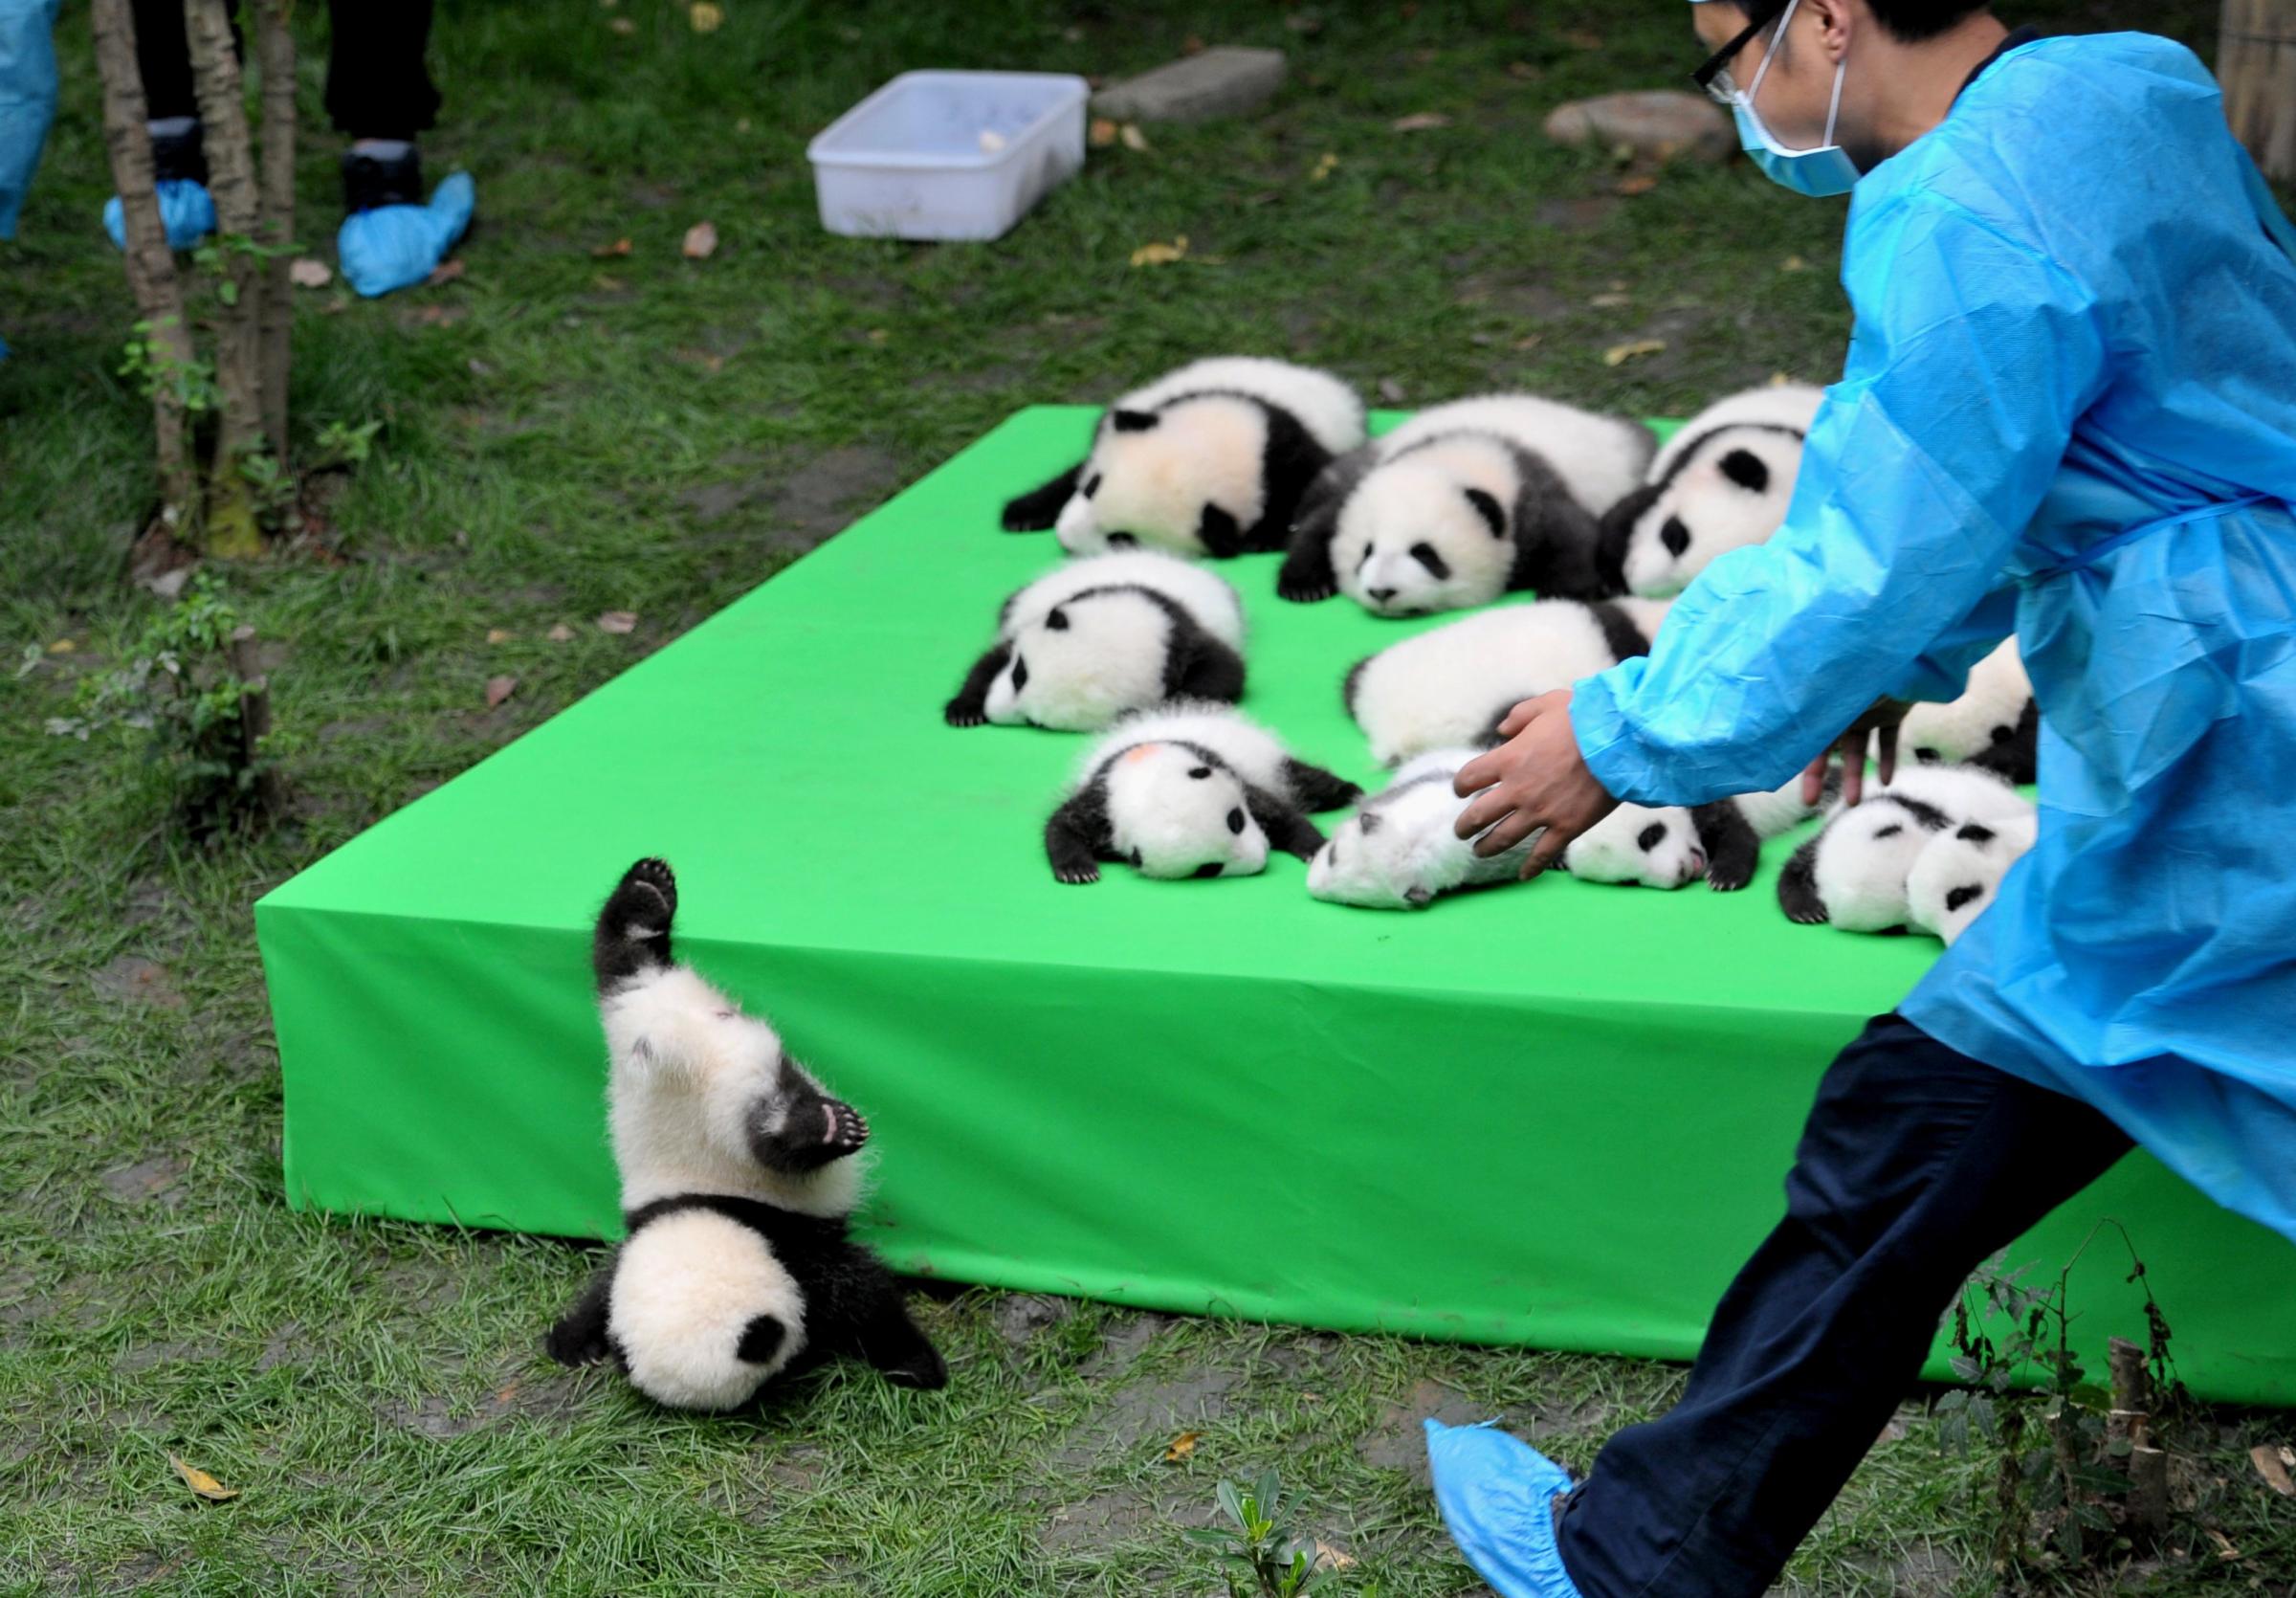 A giant panda cub falls from a stage while 23 giant pandas born in 2016 are seen on a display at the Chengdu Research Base of Giant Panda Breeding in Chengdu, Sichuan province, China, on Sept. 29, 2016.